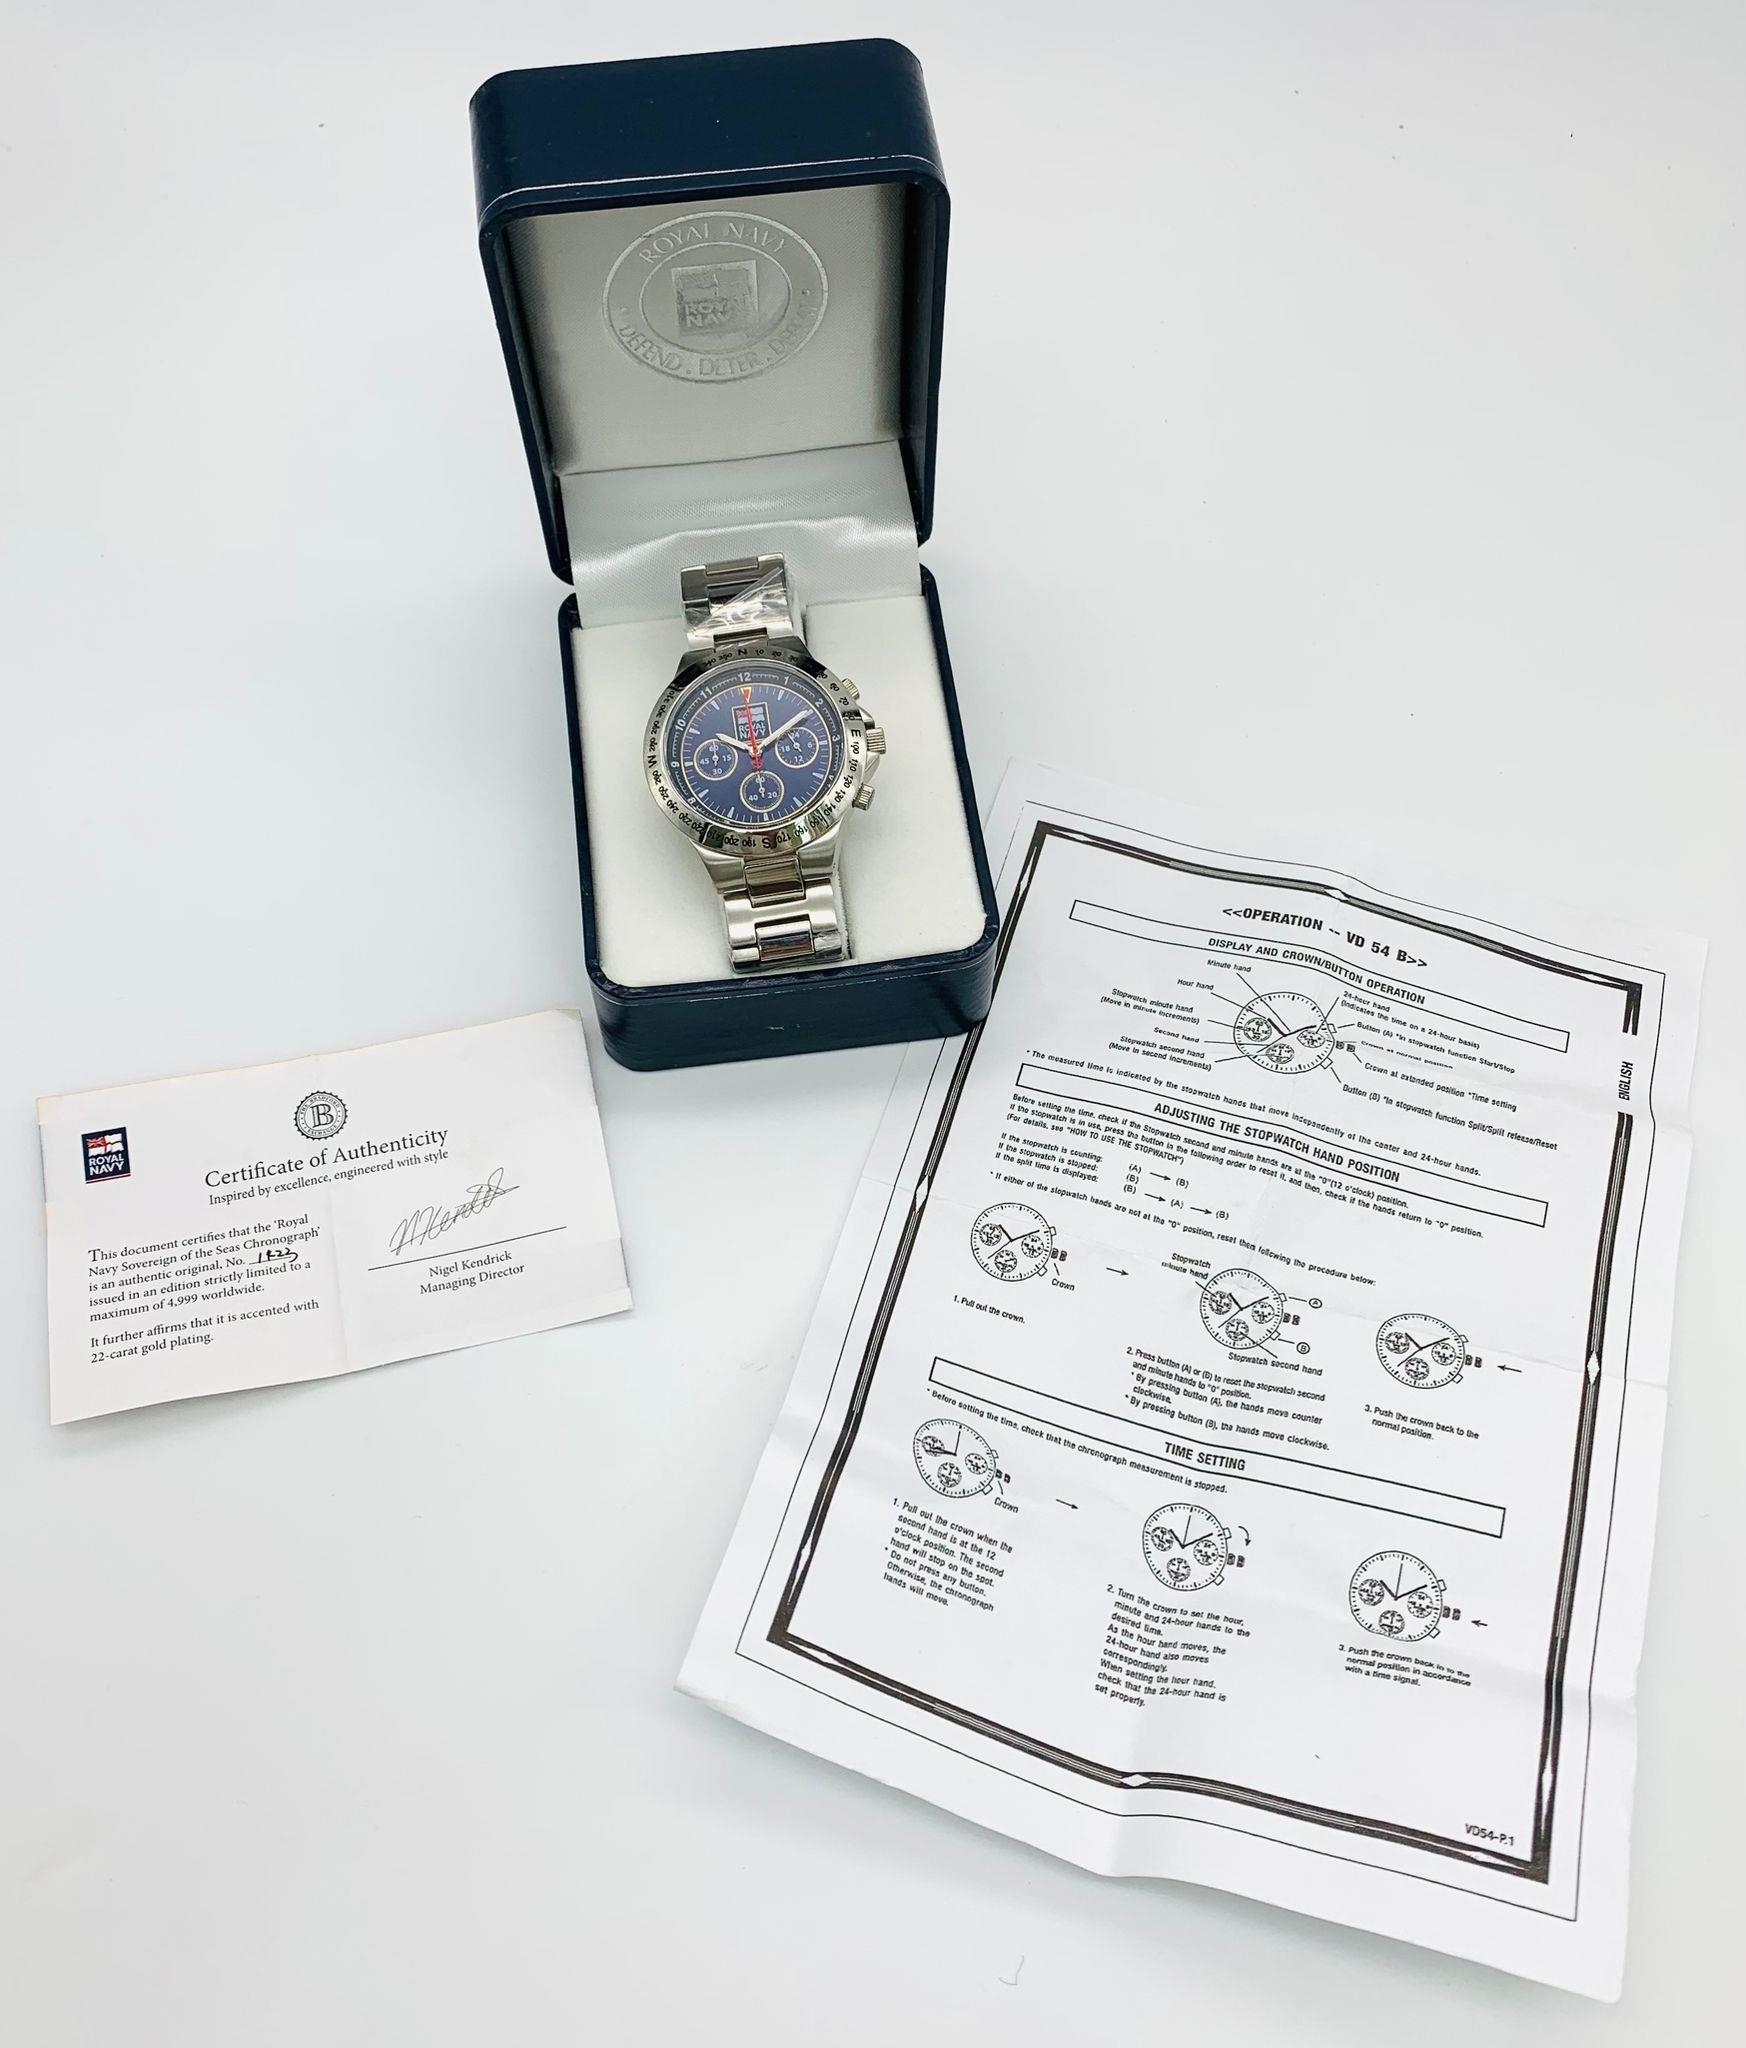 Unworn Limited Edition ‘Sovereign on the Seas’ Royal Navy Chronograph Watch, still in Original Box - Image 3 of 12